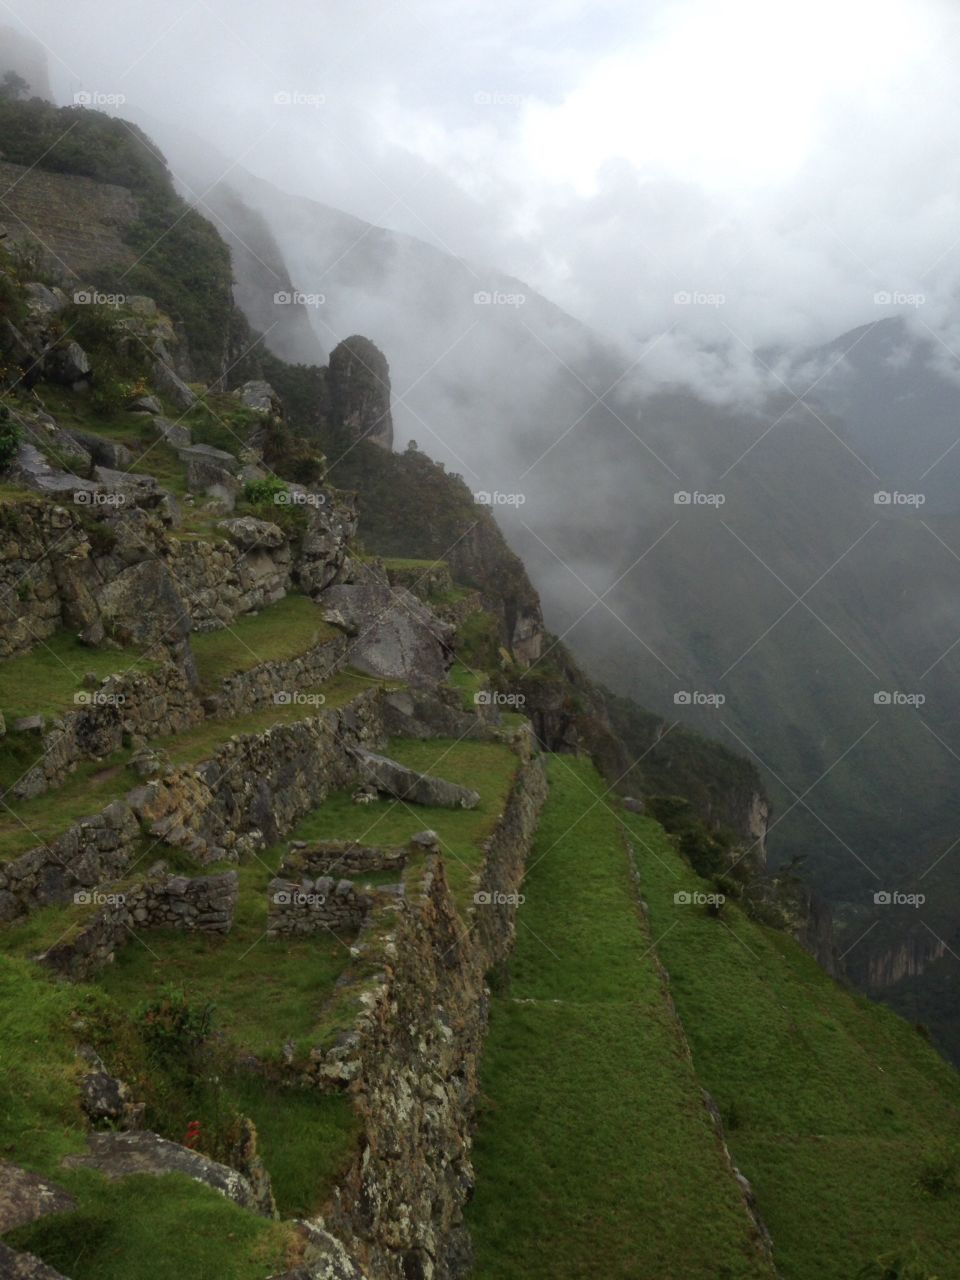 The Andes at Machu Picchu